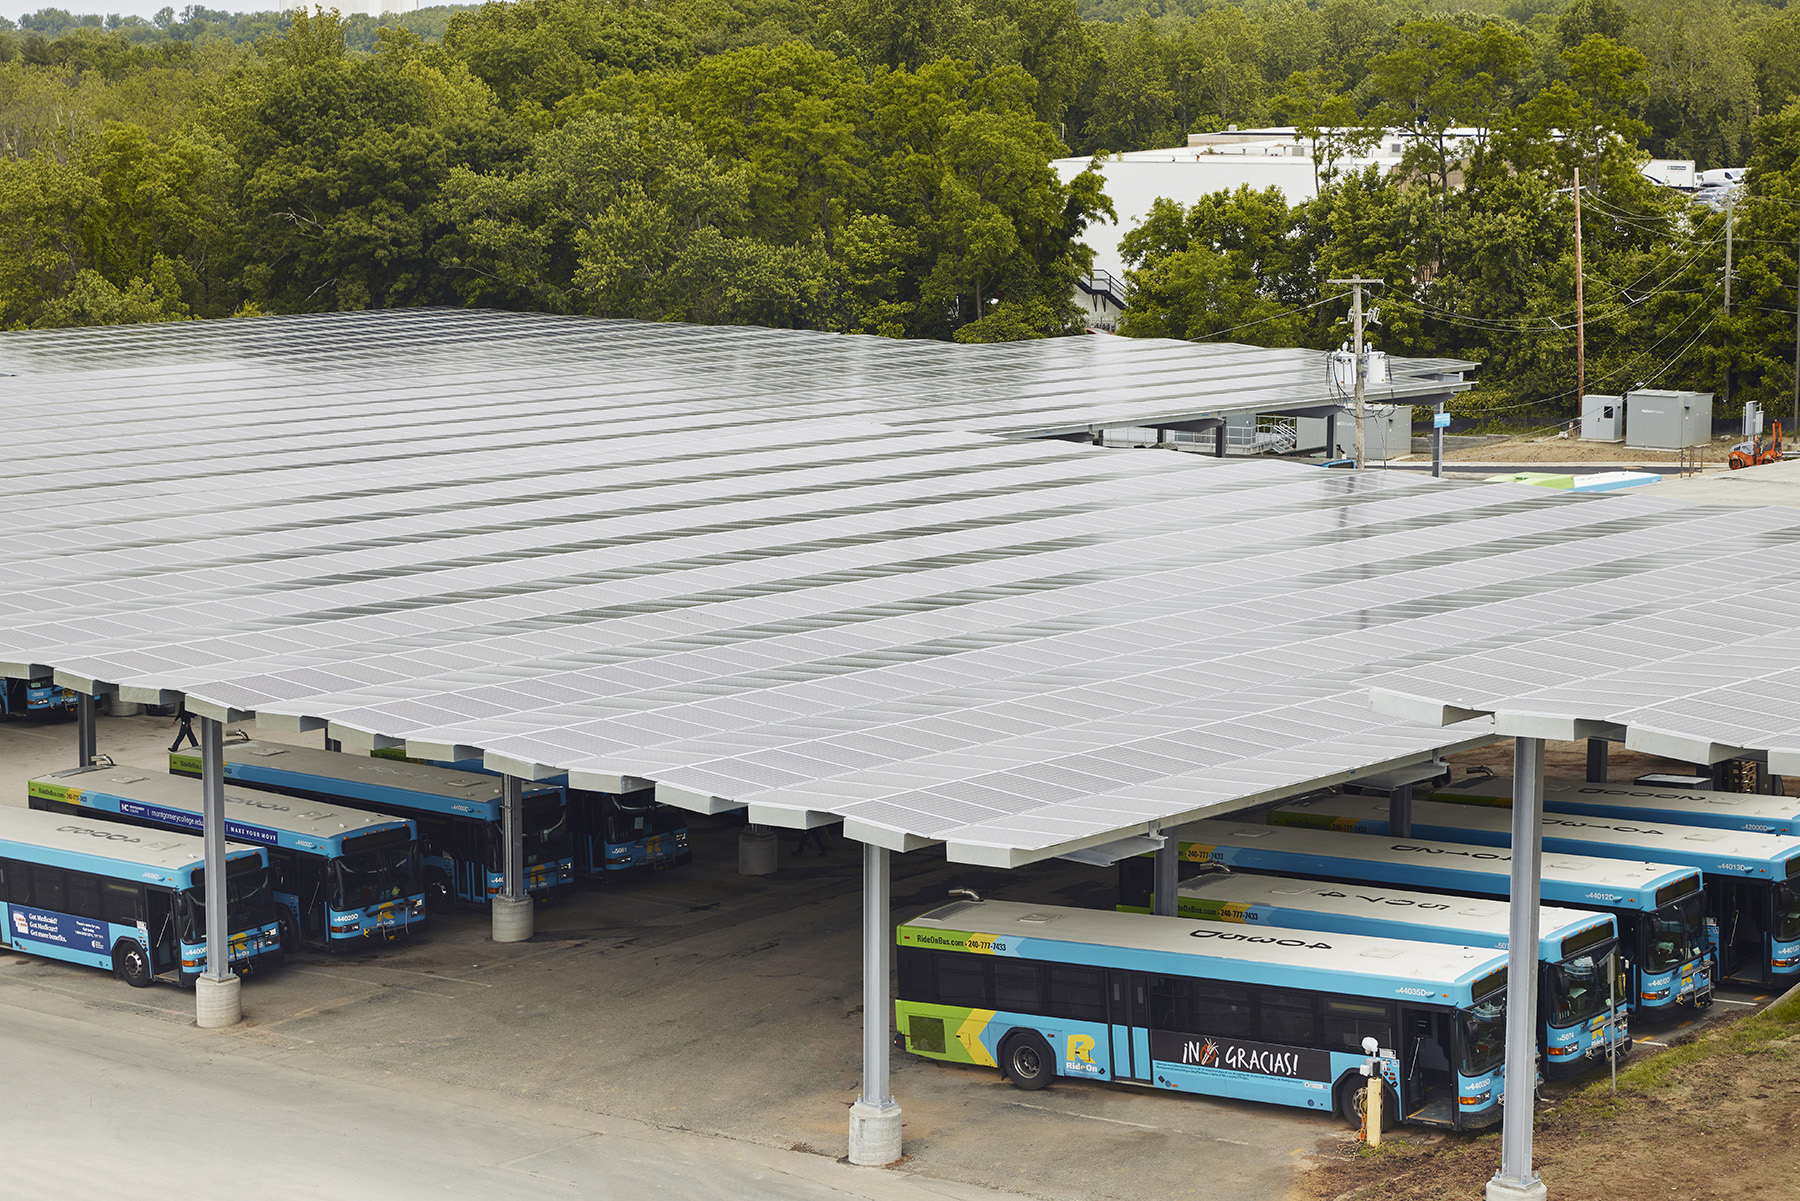 The photograph shows electric buses beneath a canopy covered in solar panels. 